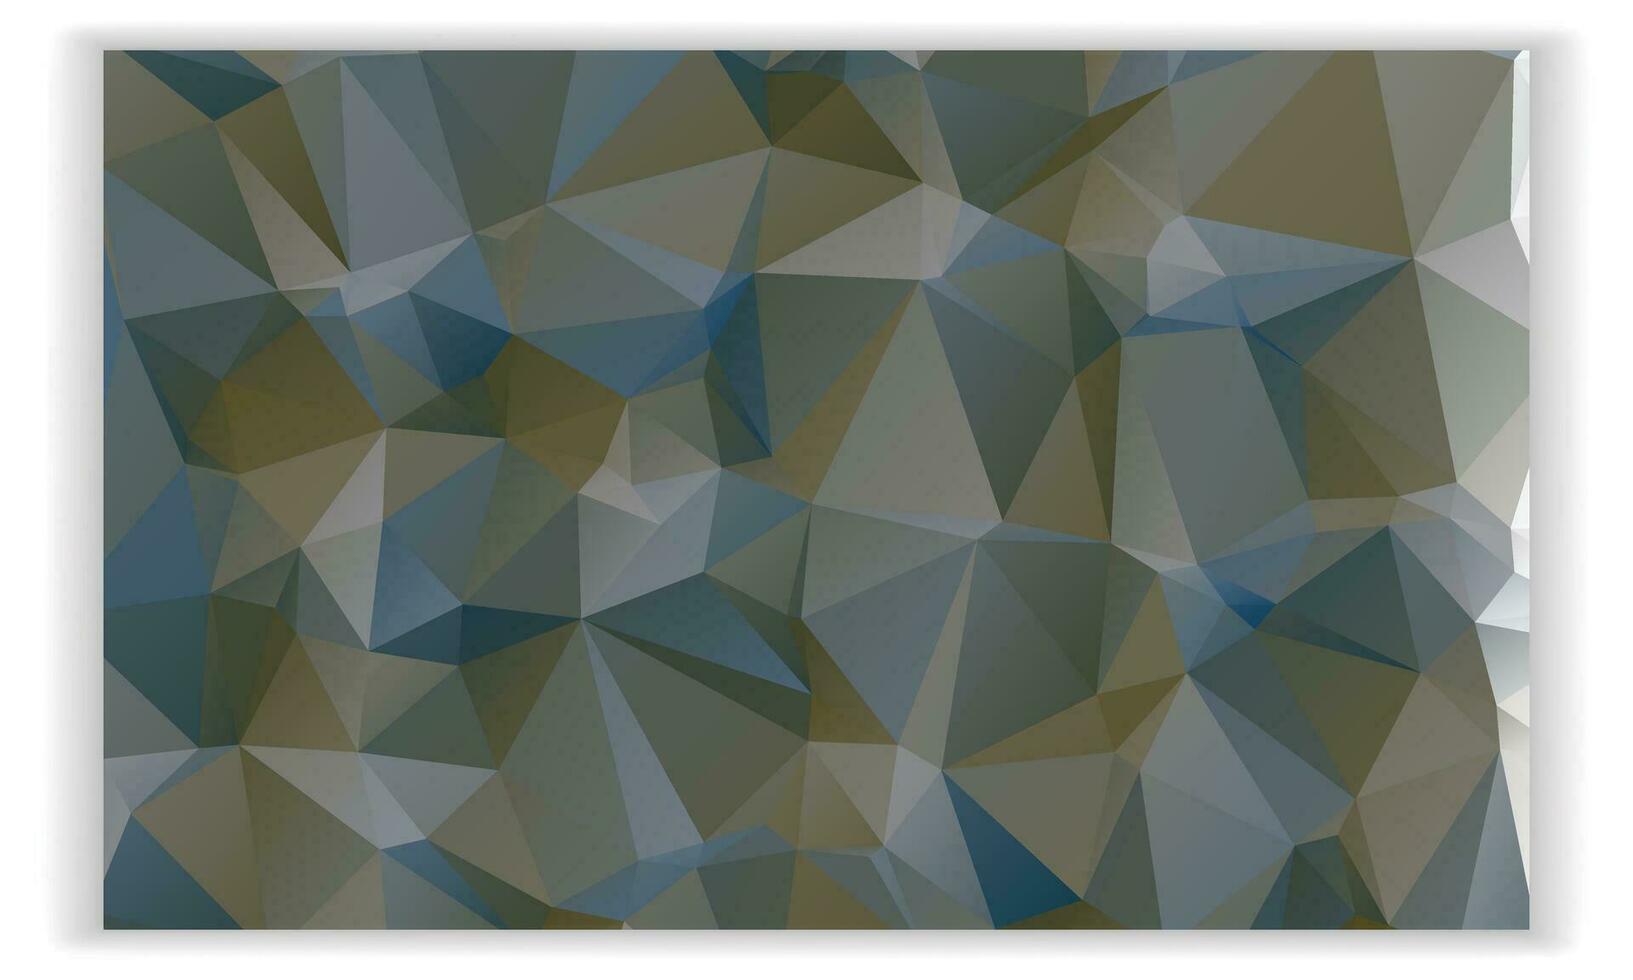 Triangular abstract background vector